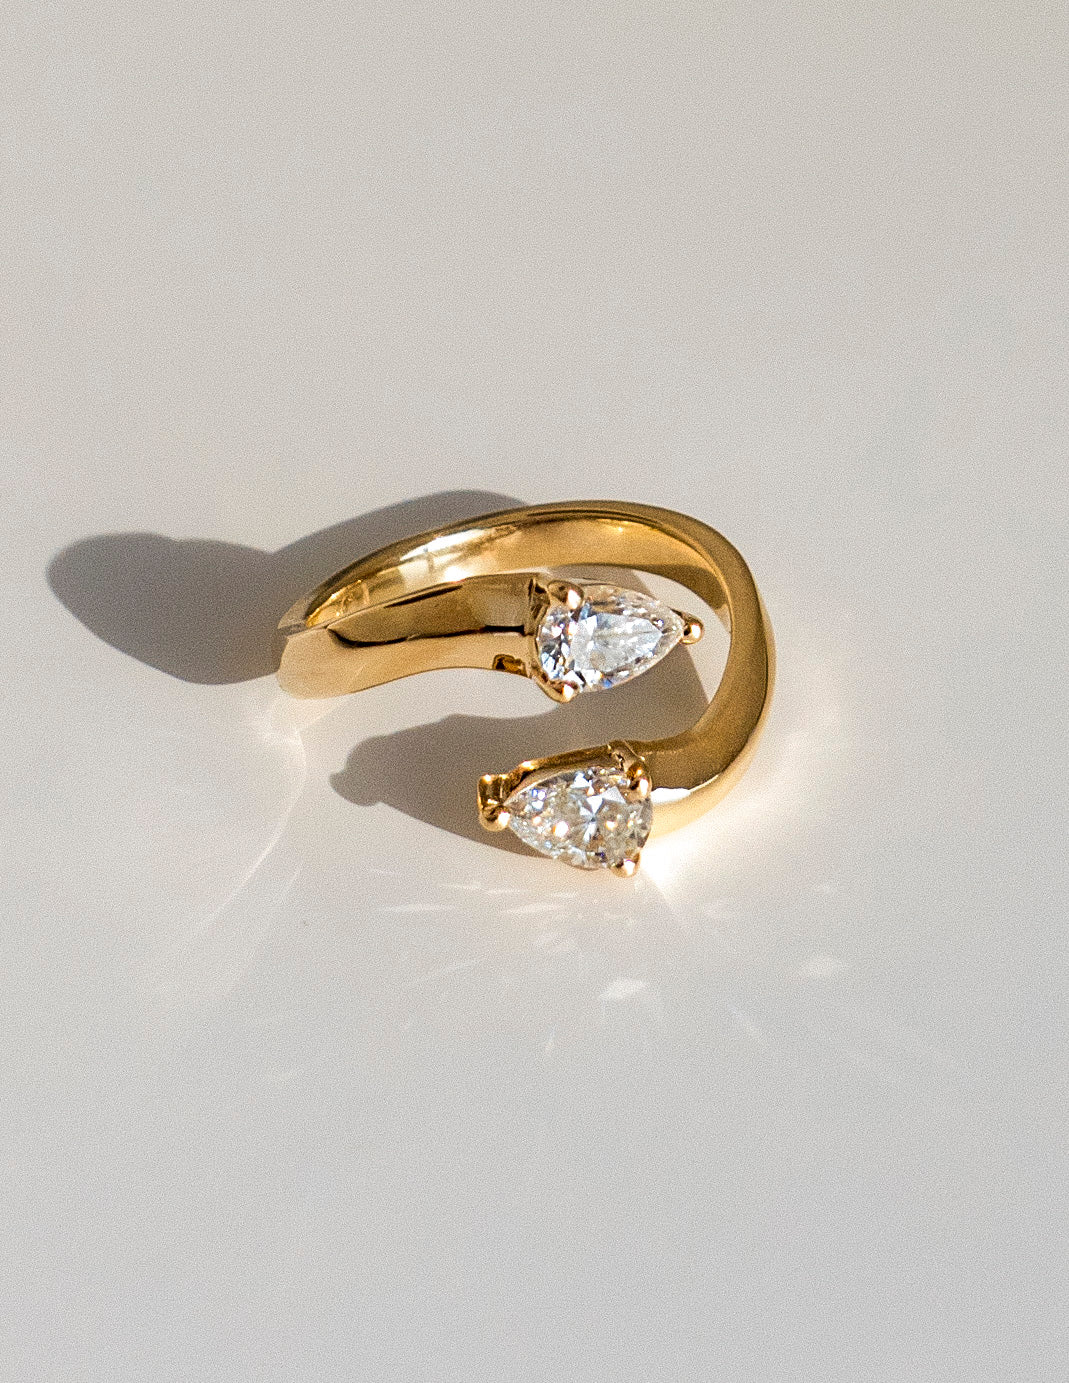 Cadette Koi Ring is a unique nature-inspired engagement ring. Unique water-inspired engagement ring. Unique japanese-inspired engagement ring.